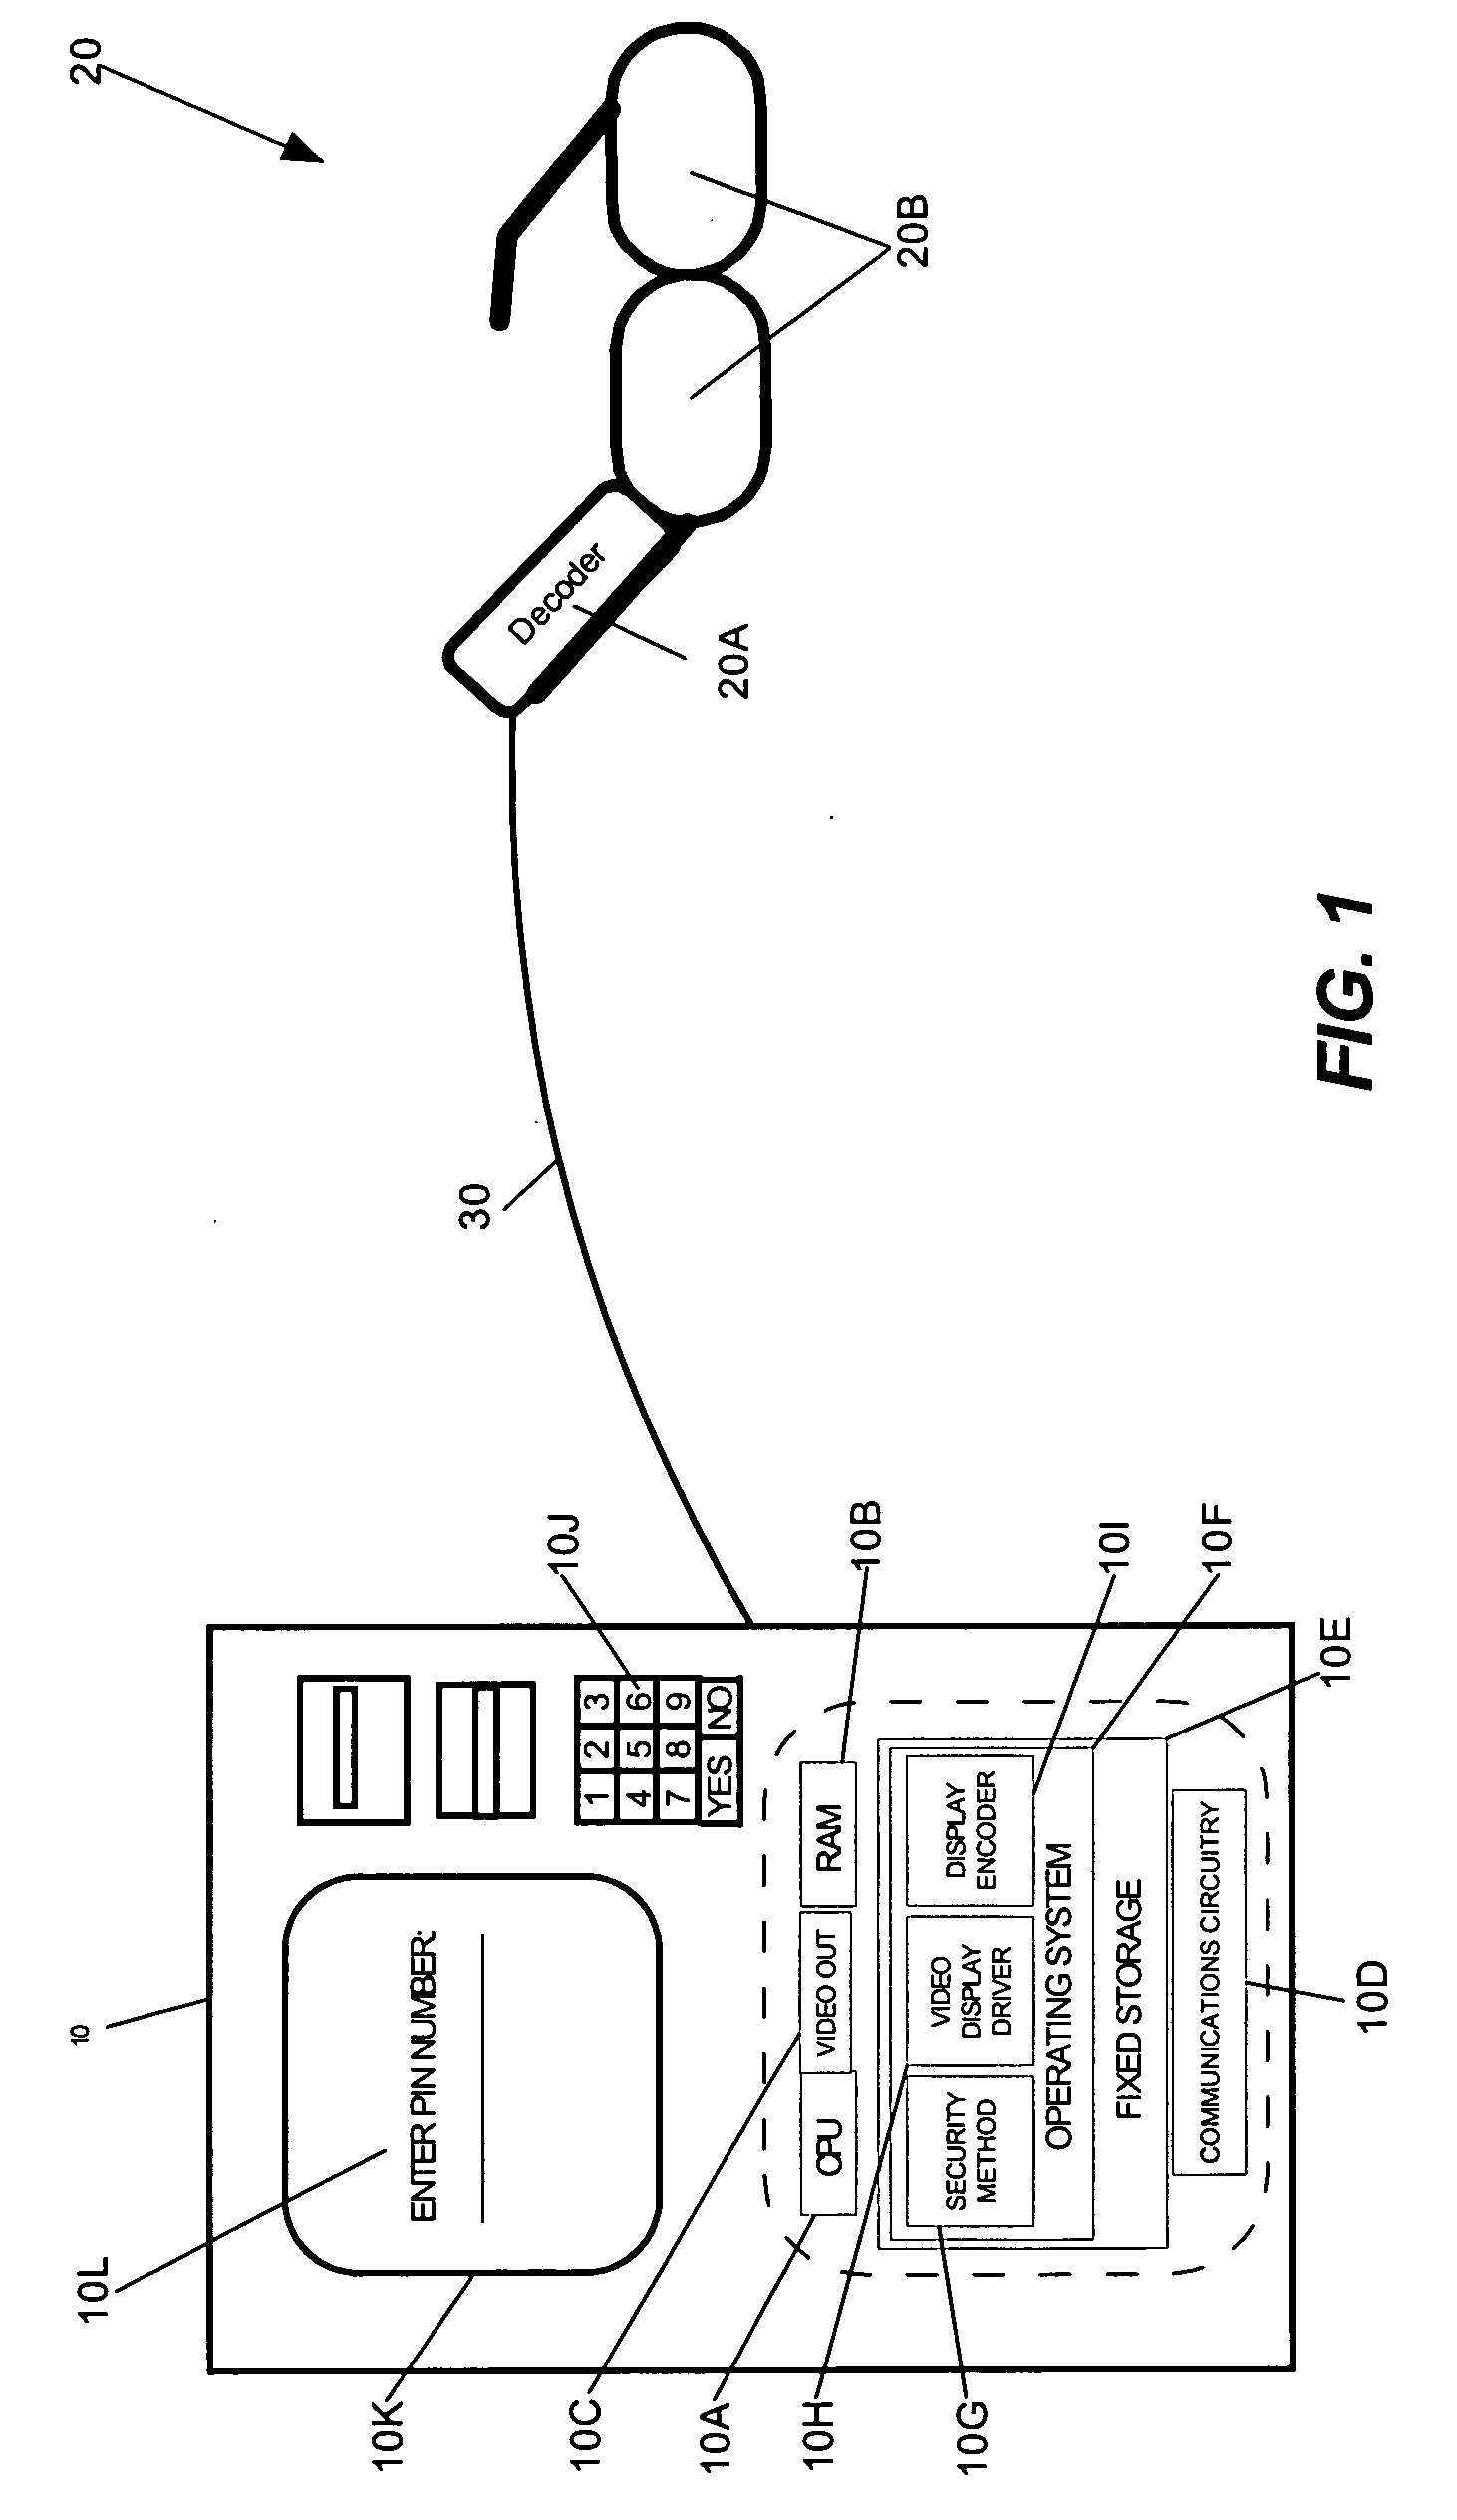 Secure entry of a user-identifier in a publicly positioned device